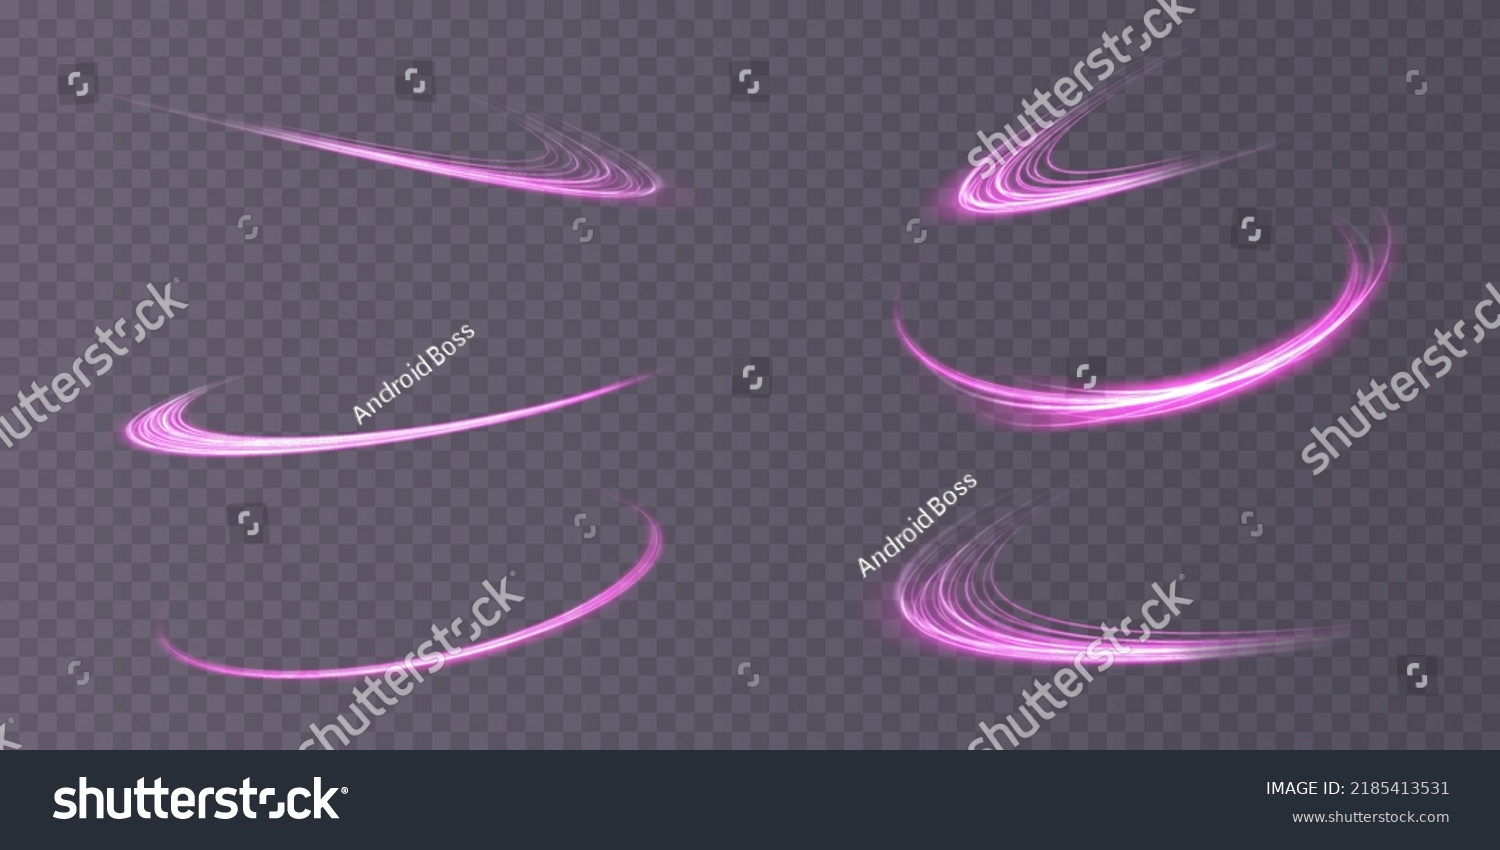 Abstract light lines of movement and speed with purple color sparkles. Light everyday glowing effect. semicircular wave, light trail curve swirl, car headlights, incandescent optical fiber png.
 #2185413531